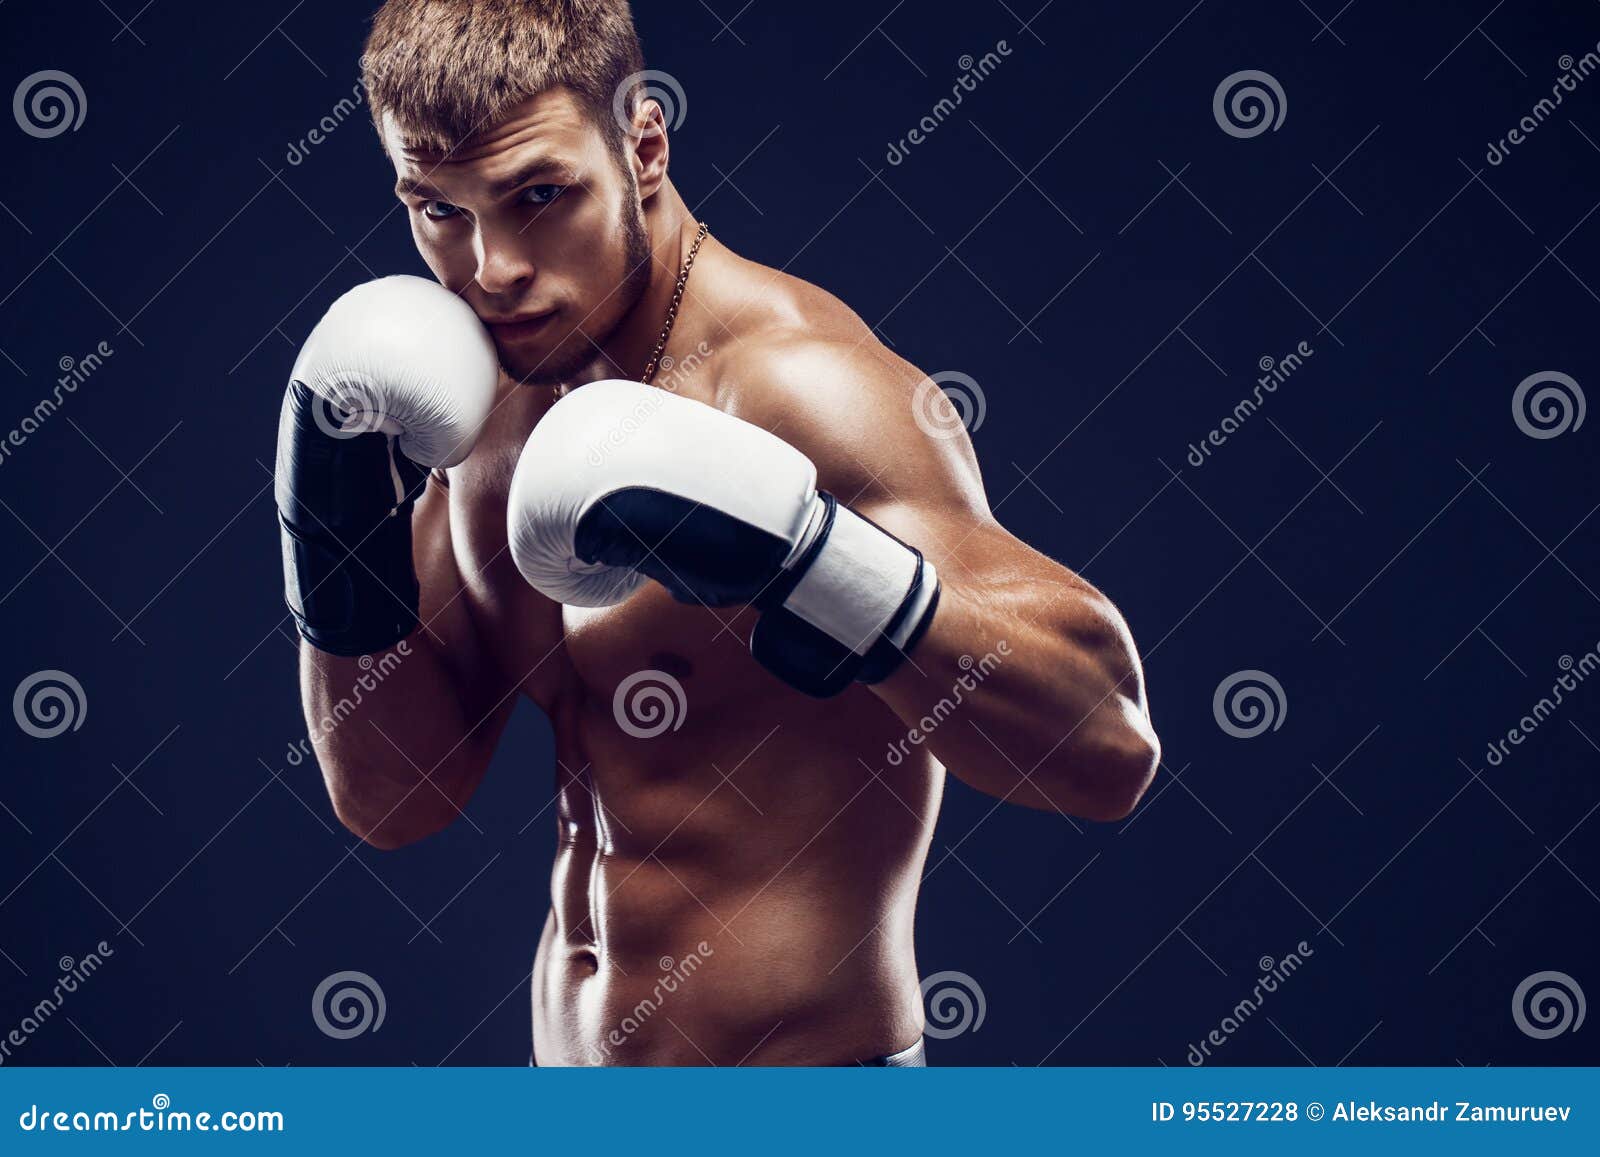 Shirtless Sweaty Boxer Standing Against Black Background 